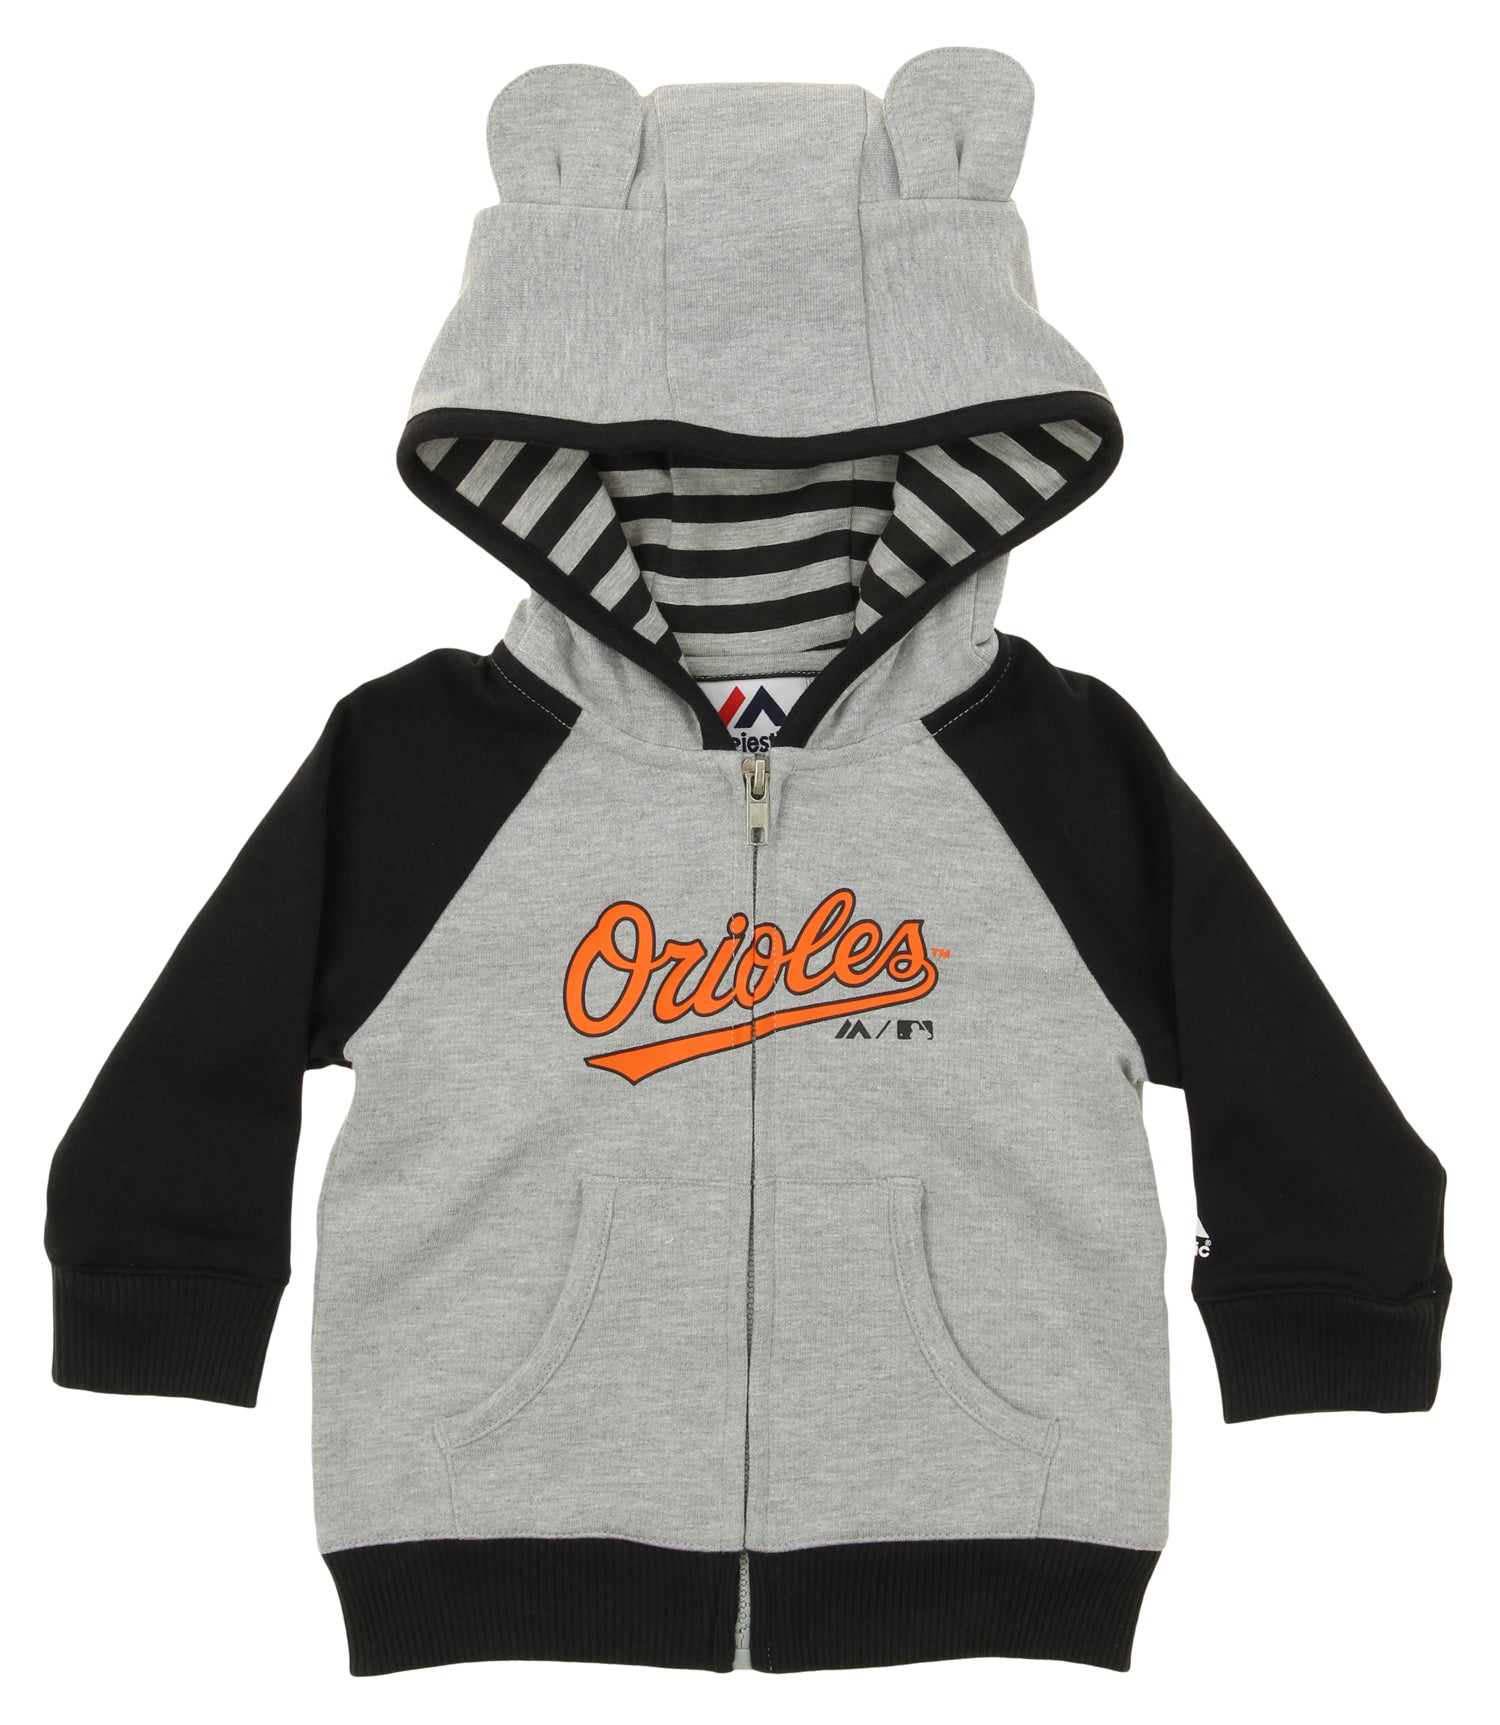 MLB Baltimore Orioles Infant Boys' Pullover Jersey - 12M